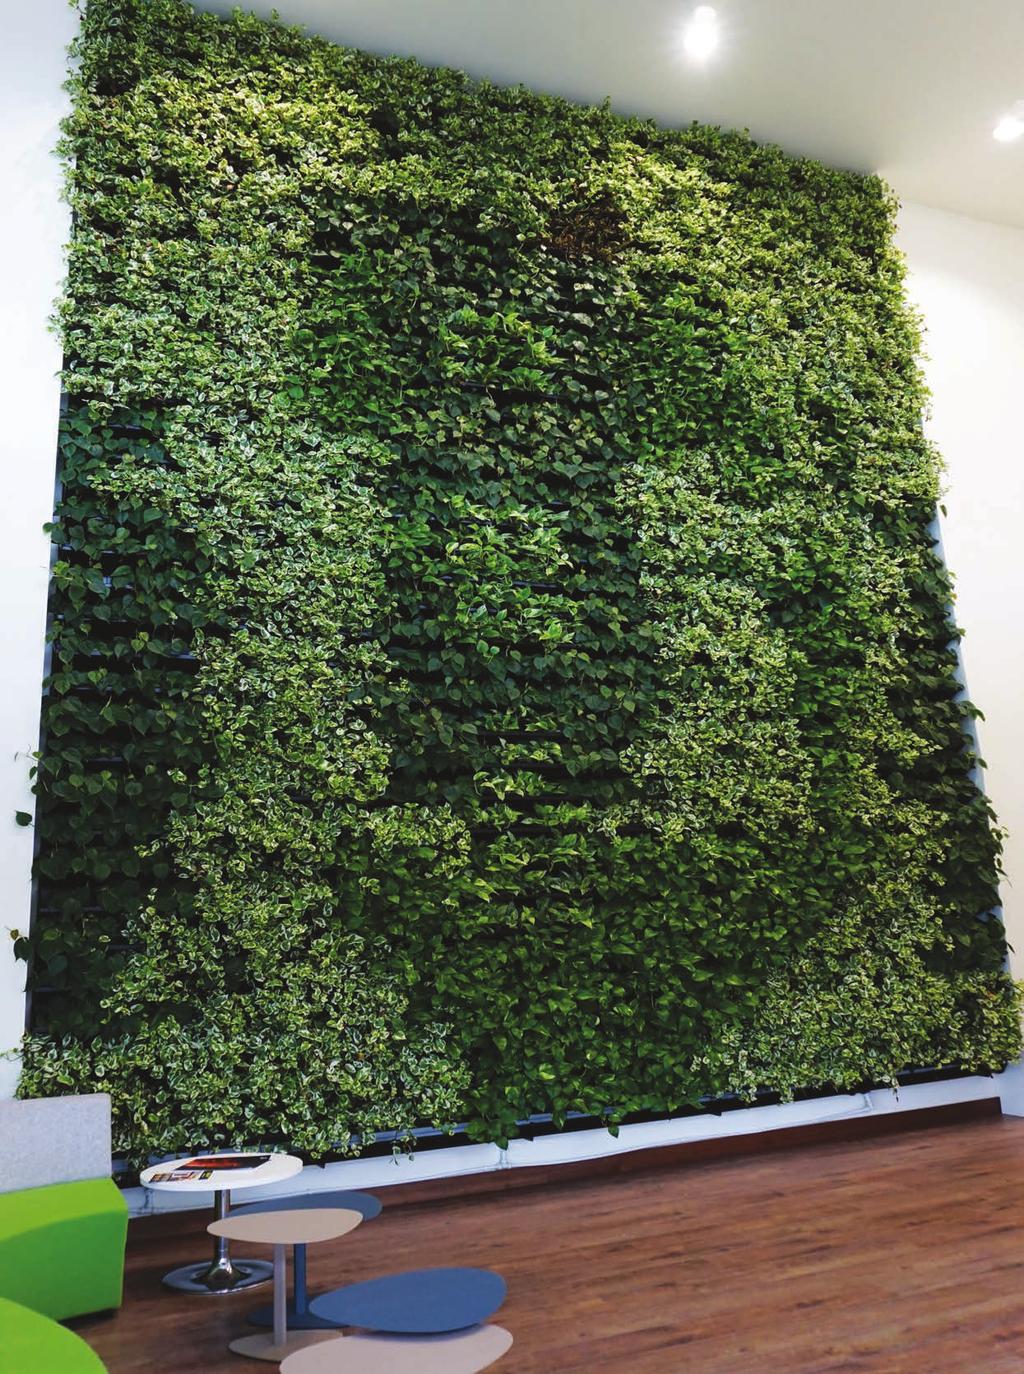 System easily transforms walls into an attractive, living surface Living Walls We know